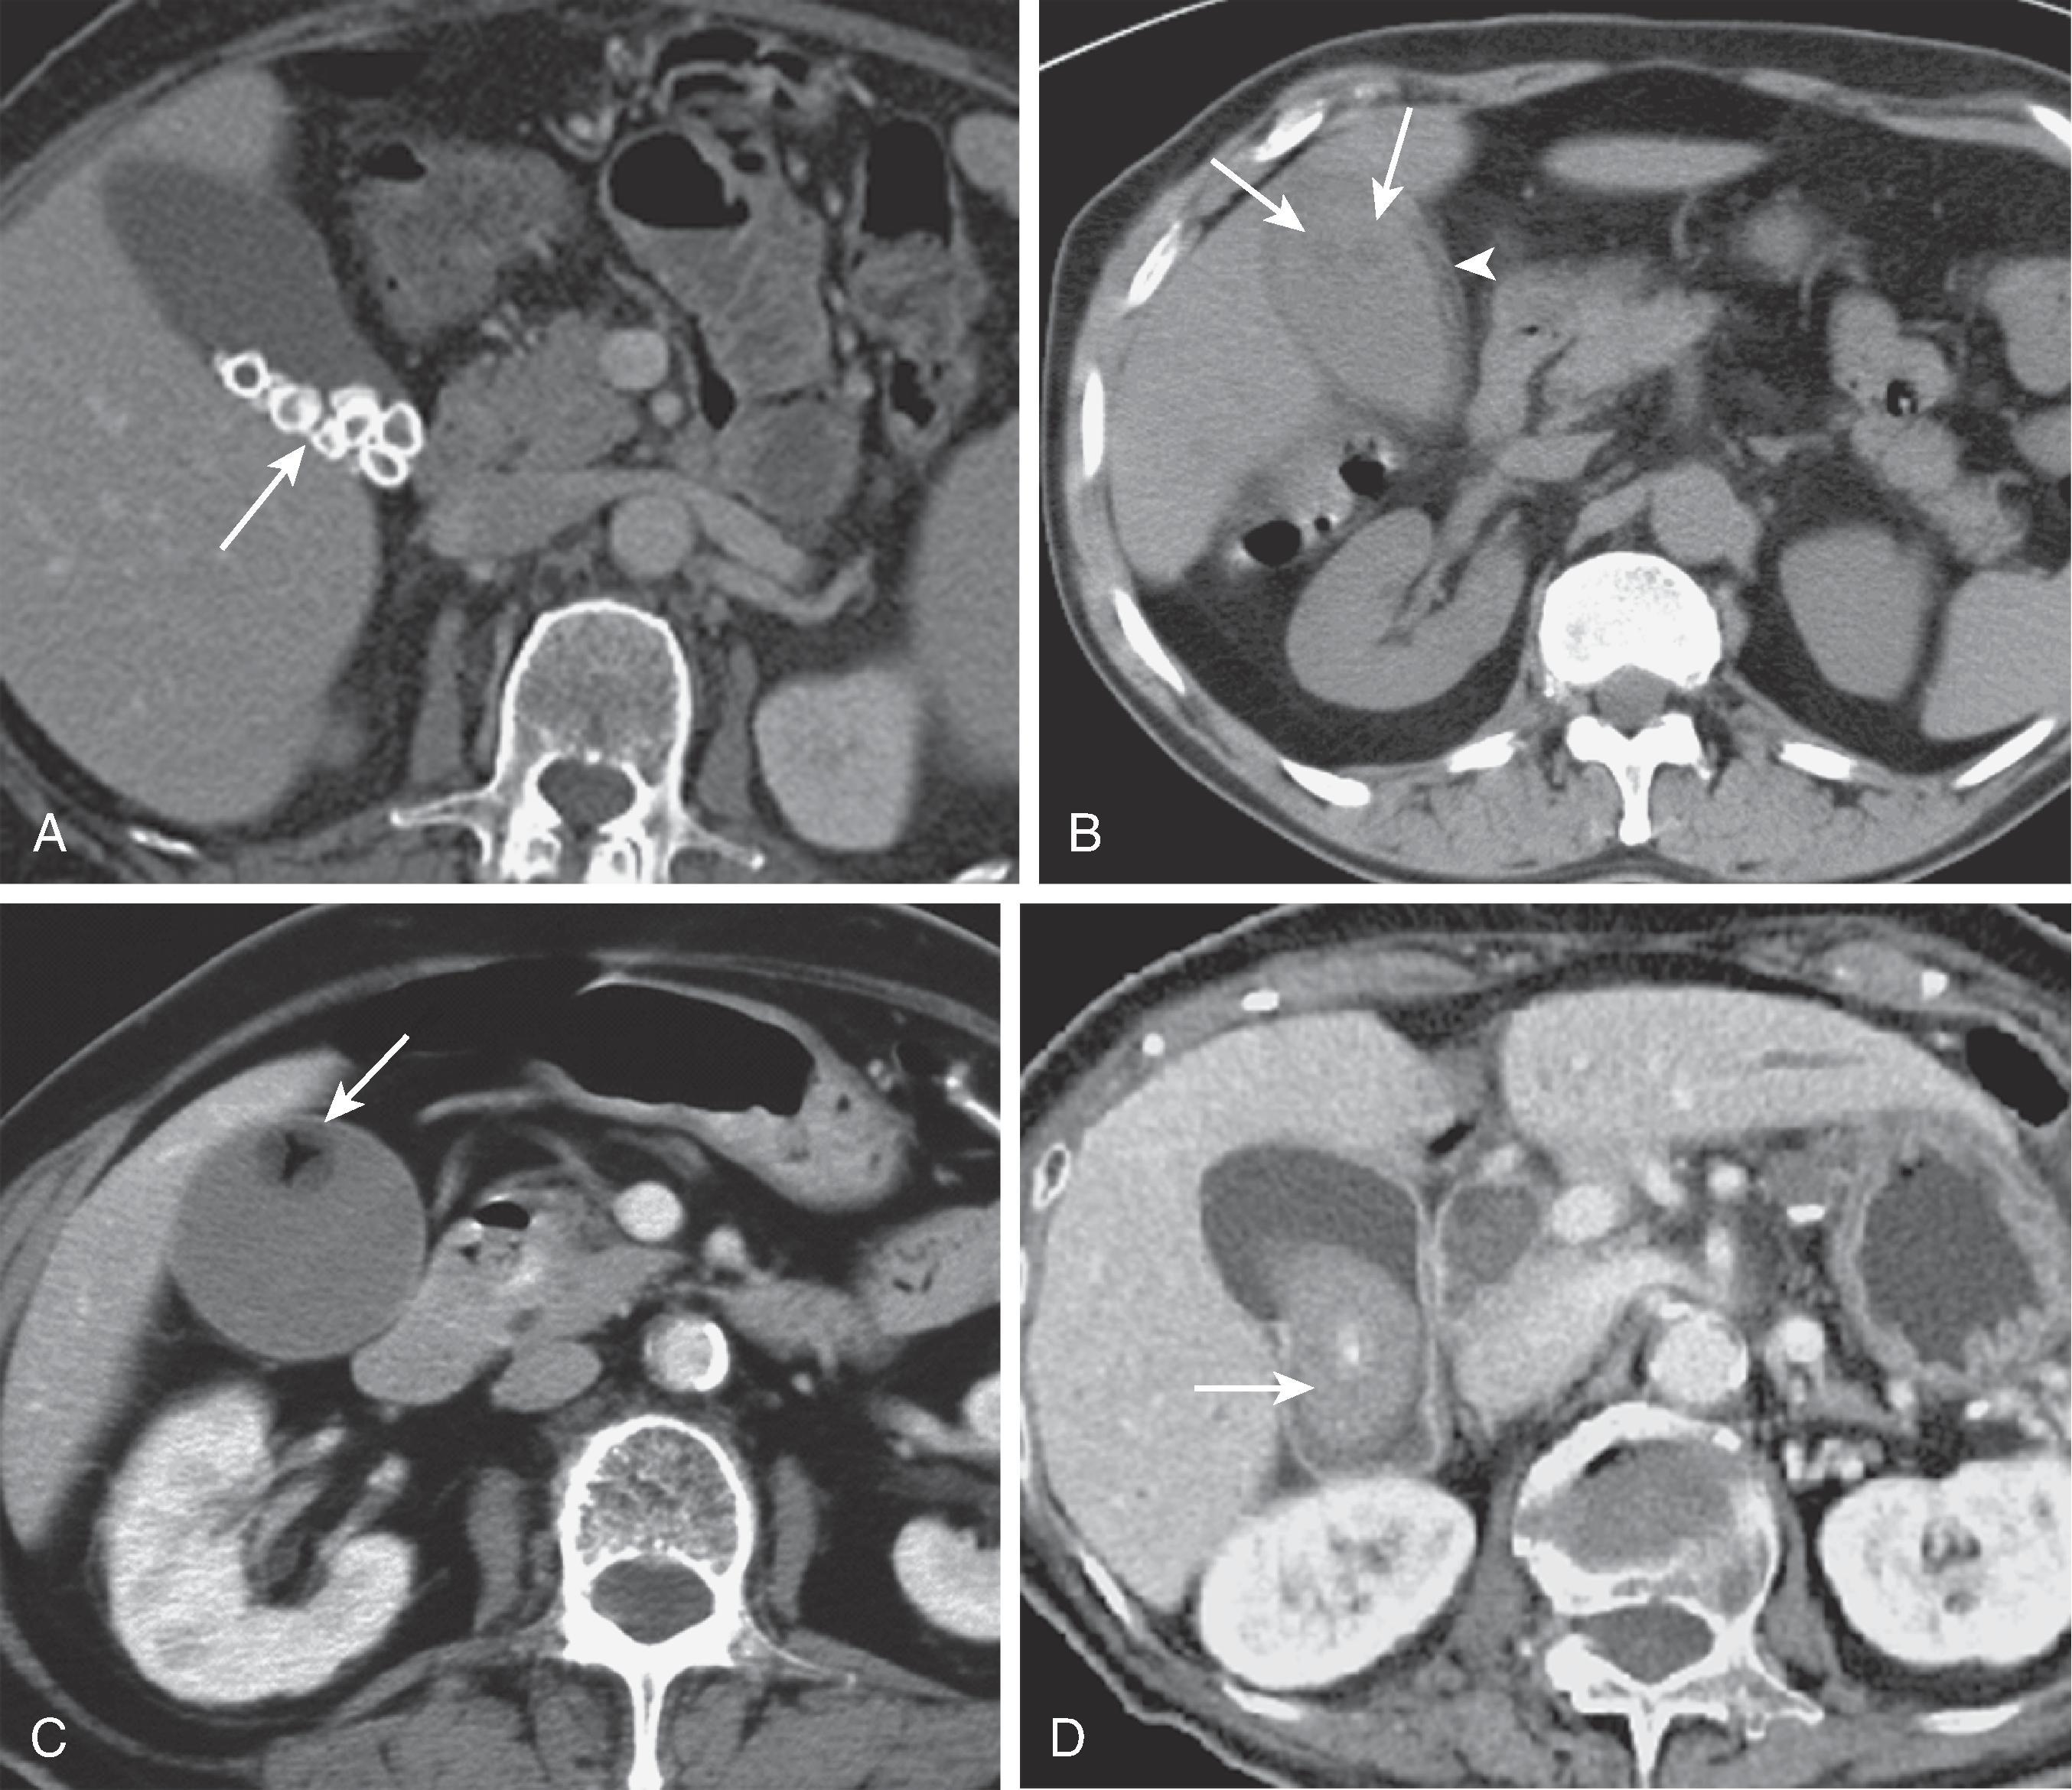 Fig. 49.6, Computed tomography appearance of gallstones. (A) Calcified stones depicted as calcified dependent densities in the gallbladder lumen (arrow) . (B) Noncalcified stones may be visible if they are less dense than bile (arrows) . This patient also had acute cholecystitis. Note thickened gallbladder wall (arrowhead) . (C) Mercedes-Benz sign. Gas-containing stone floating in bile (arrow) . (D) Pigment stone (arrow) is soft tissue density with only small central nidus of calcification.